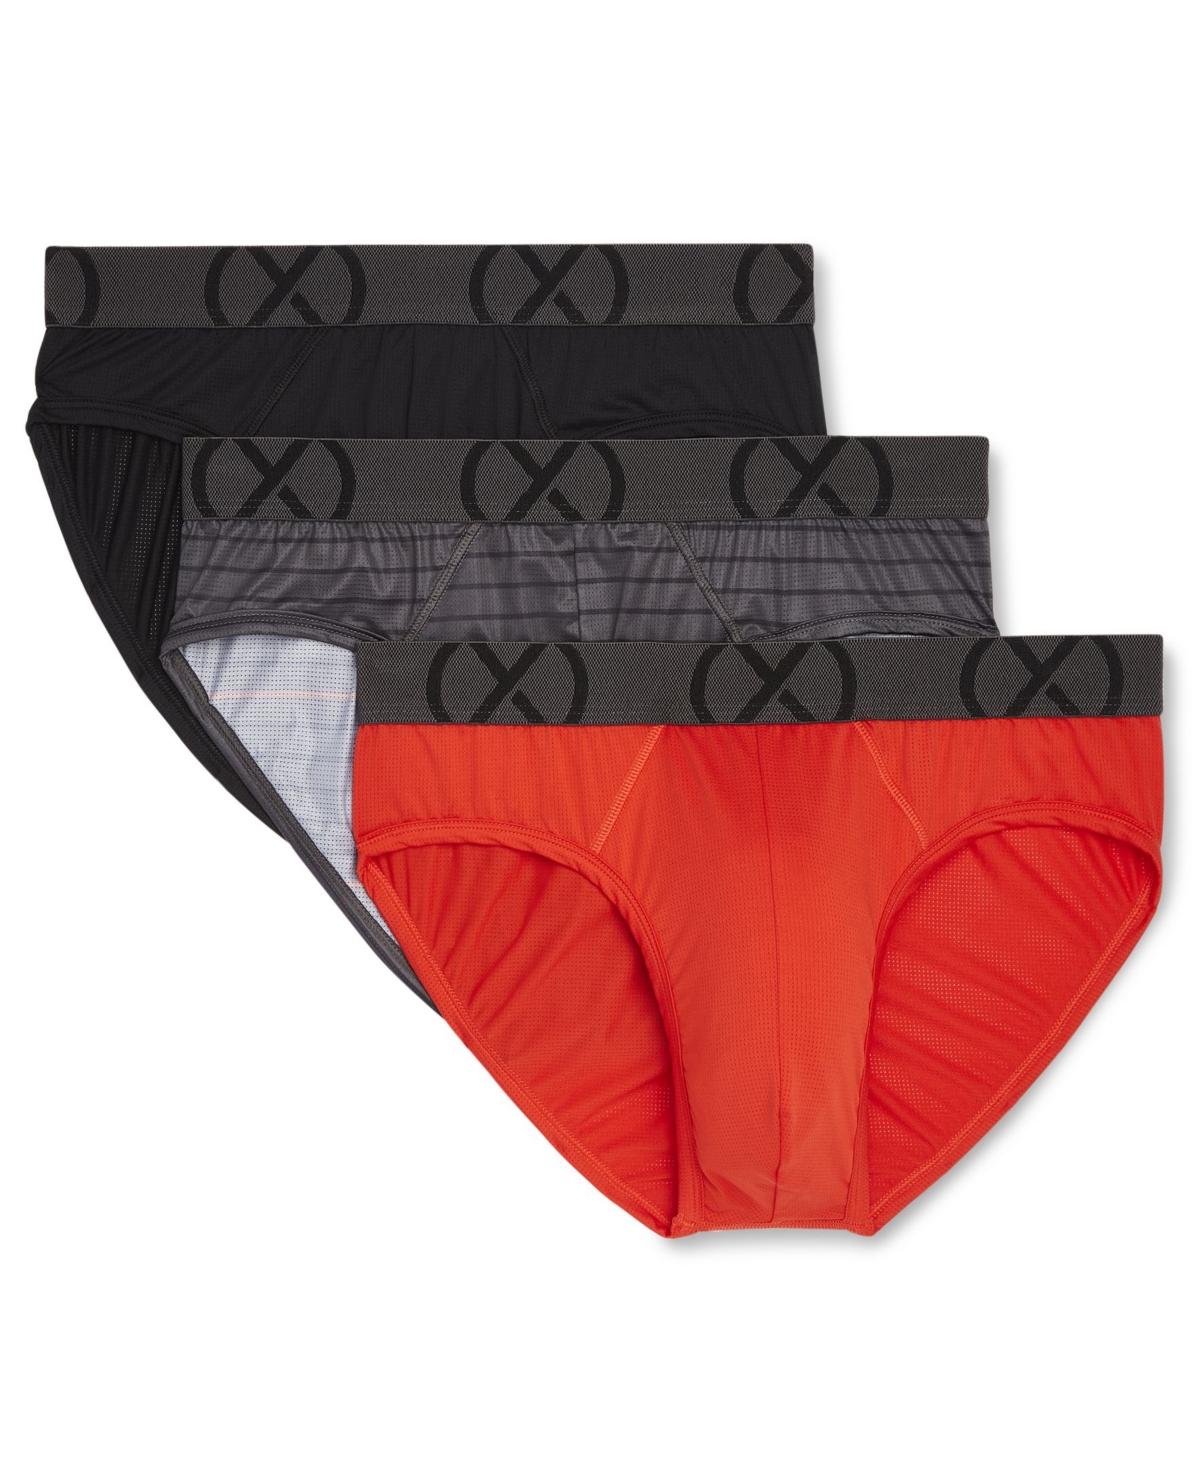 2(x)ist Men's Mesh No Show Performance Brief, Pack Of 3 In Black,thin Pop Stripe- Charcoal,fiery